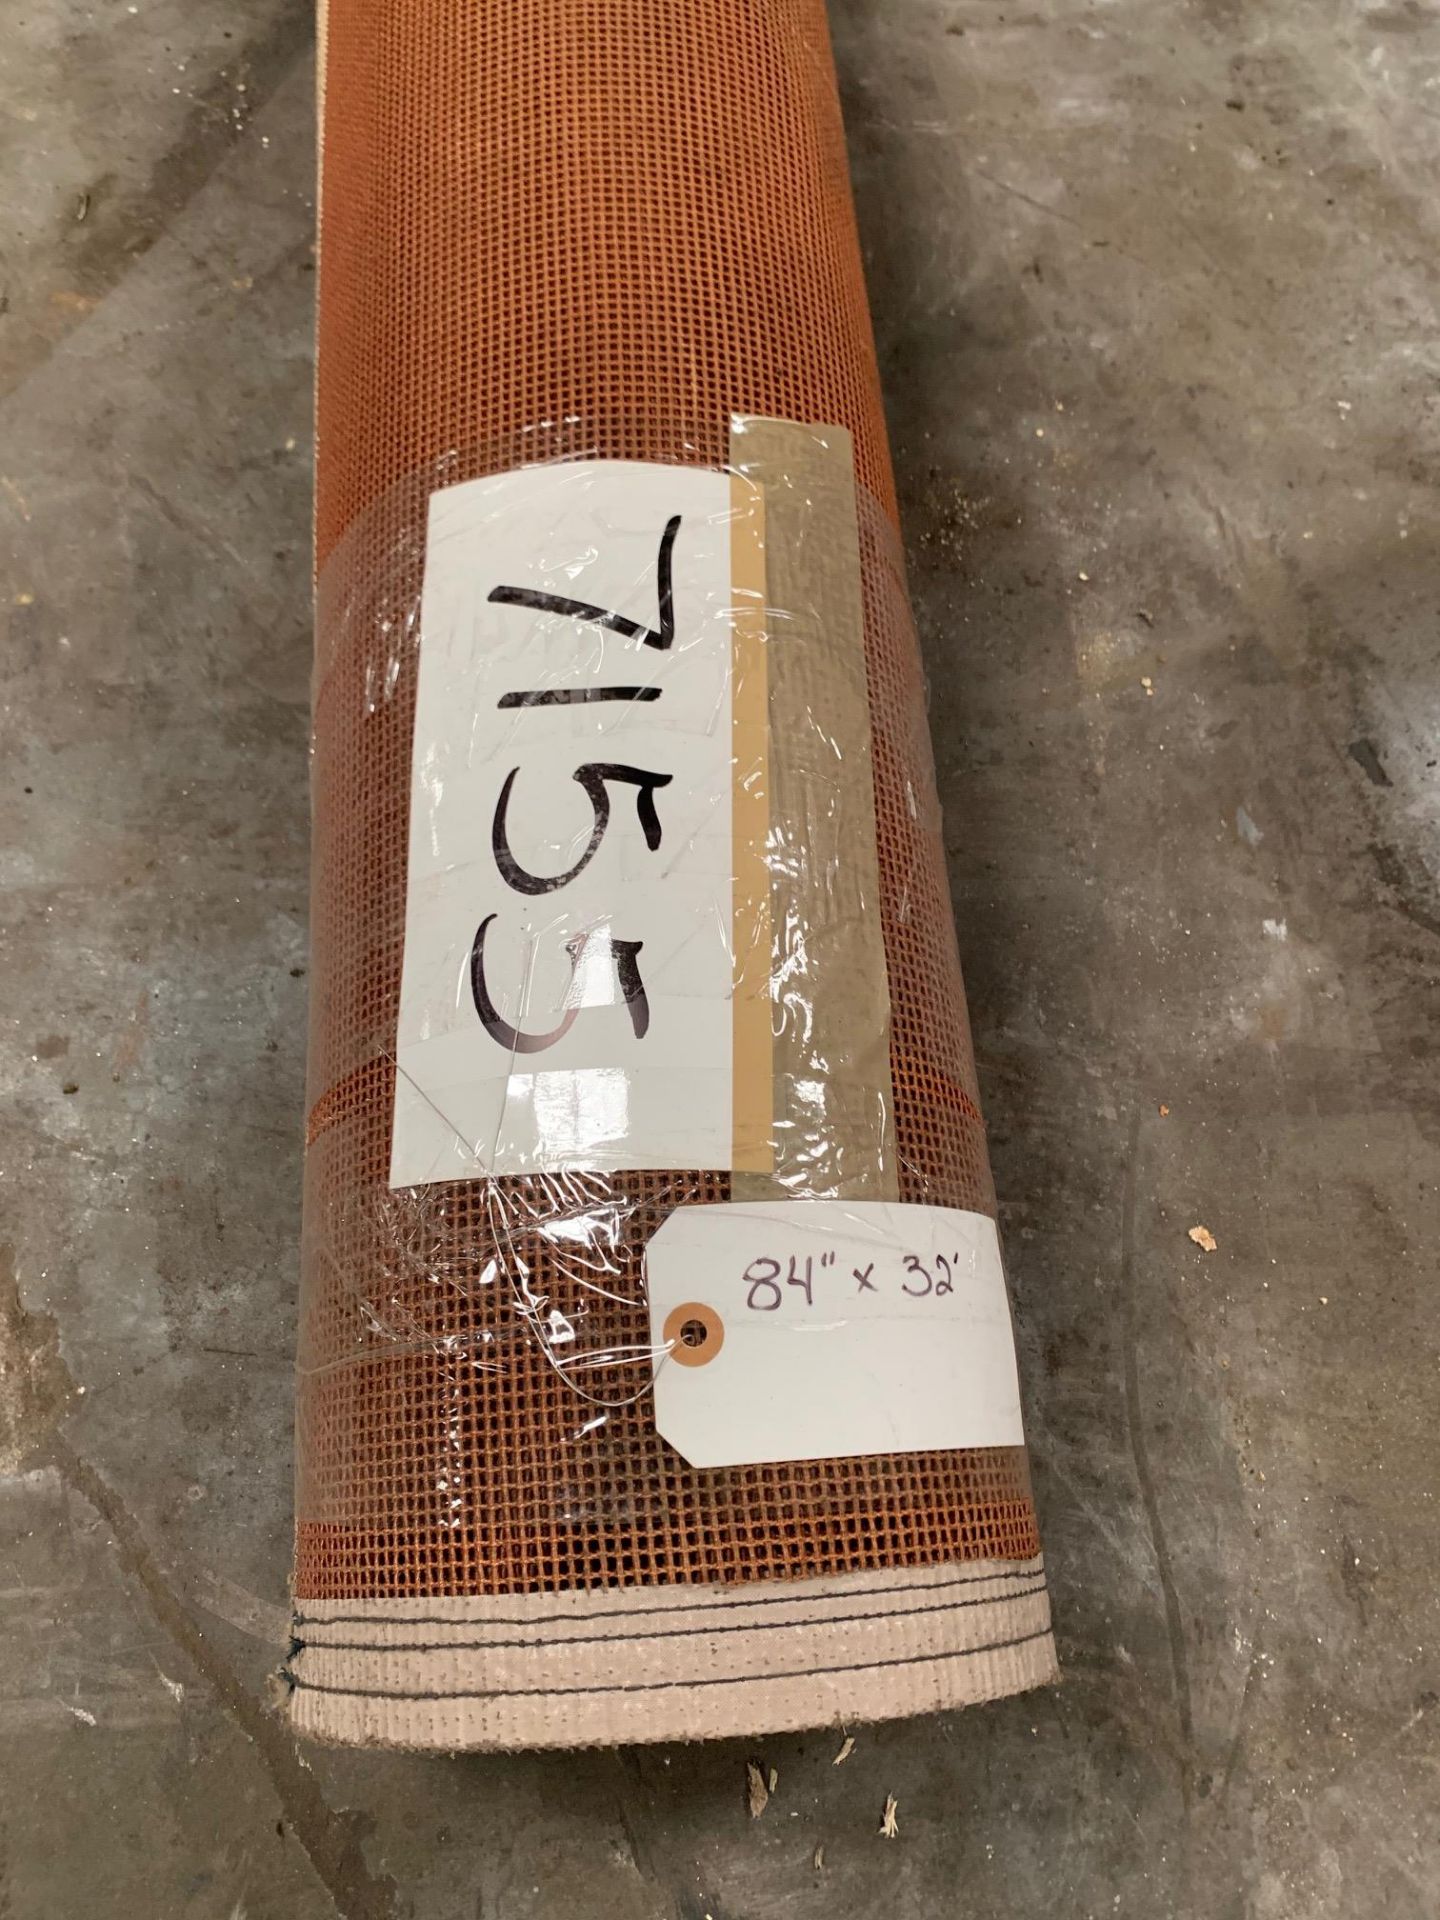 Used Dryer Belt size 84”X 32’, Rigging Fee: $25 - Image 2 of 4